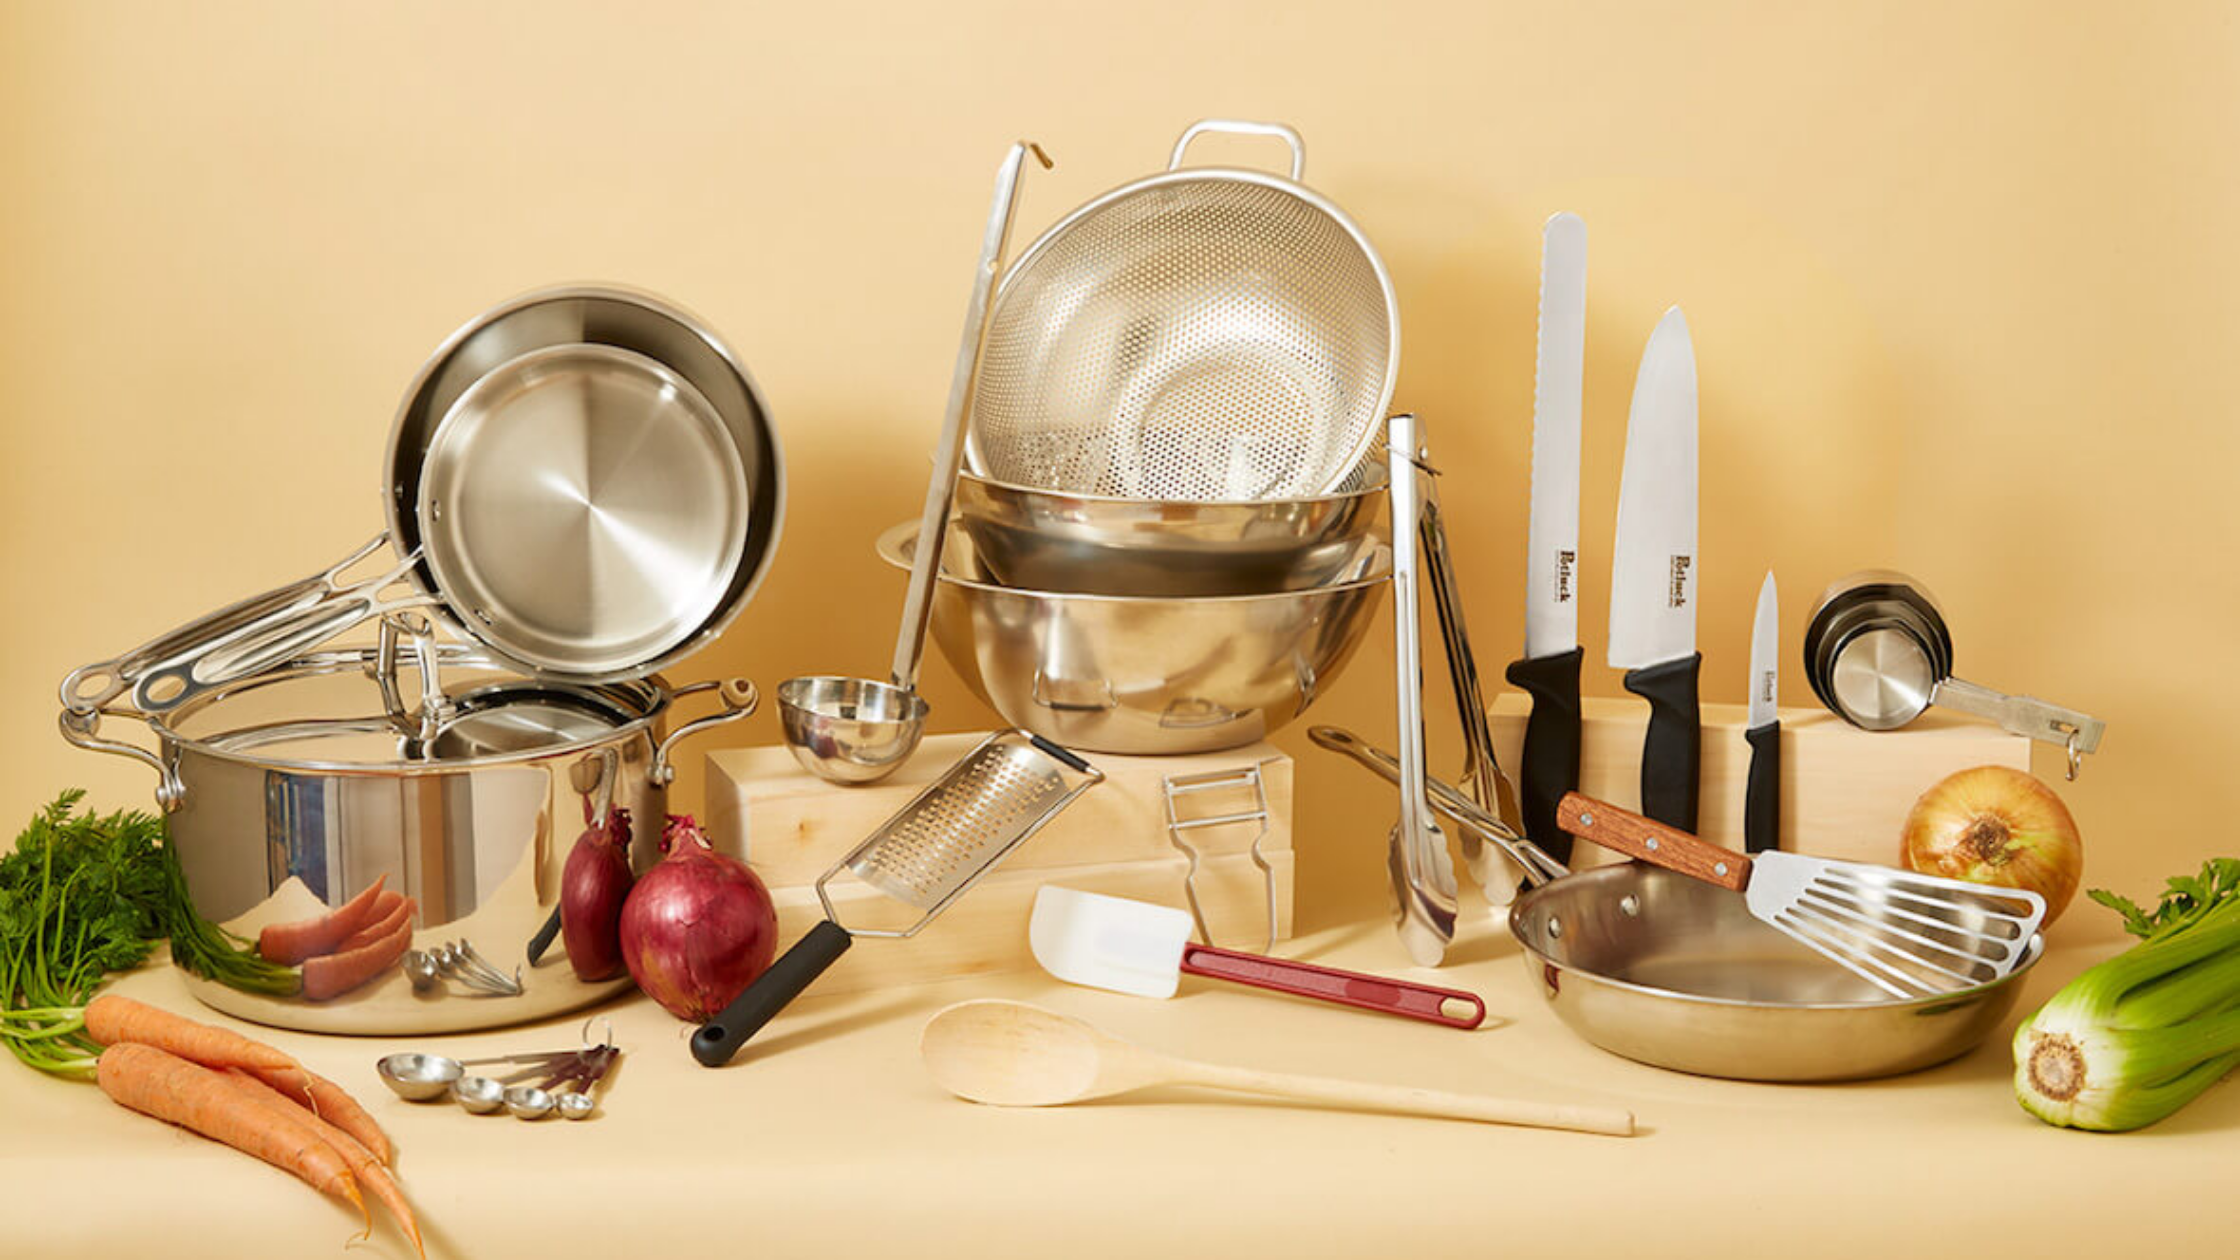 Tips on Storing and Organizing Cooking Utensils